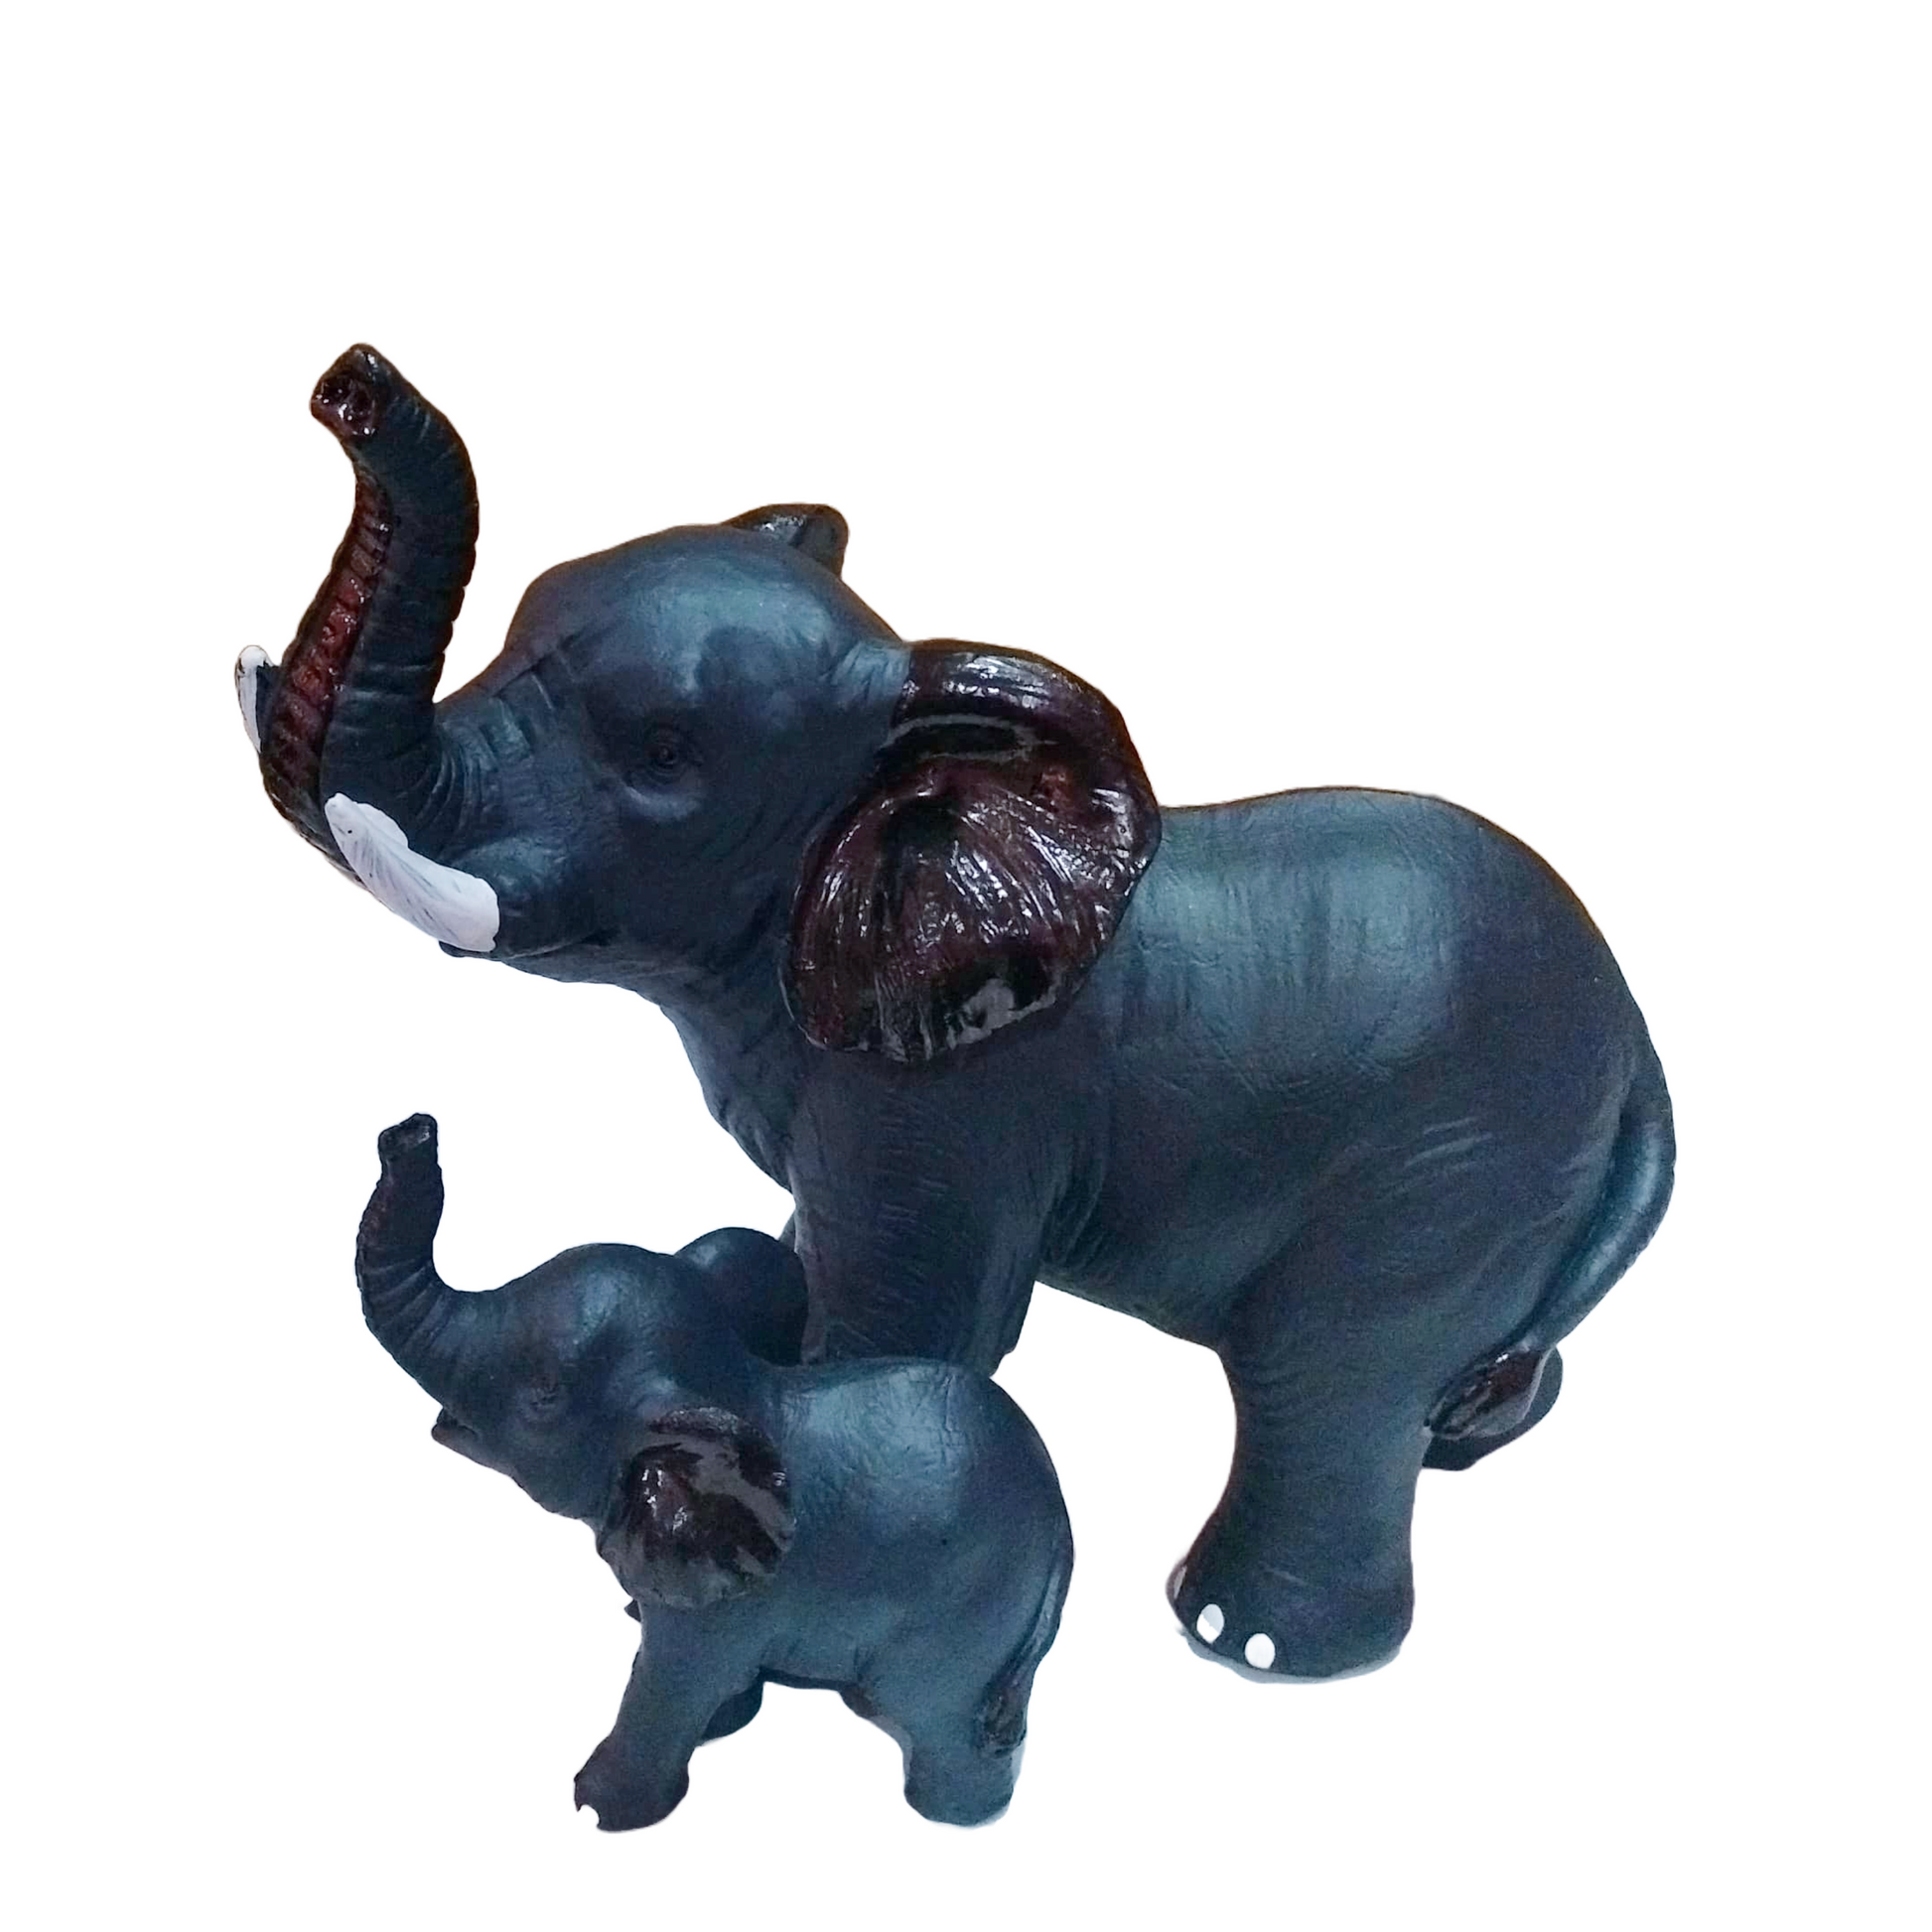 Statue ALiLA Copy of Black Elephant with Kid Statue Showpiece Idol for Gifting & Home Table Office Desk Decoration Figurines, White Marble, 8 Inches Height, Set of 2 Statue